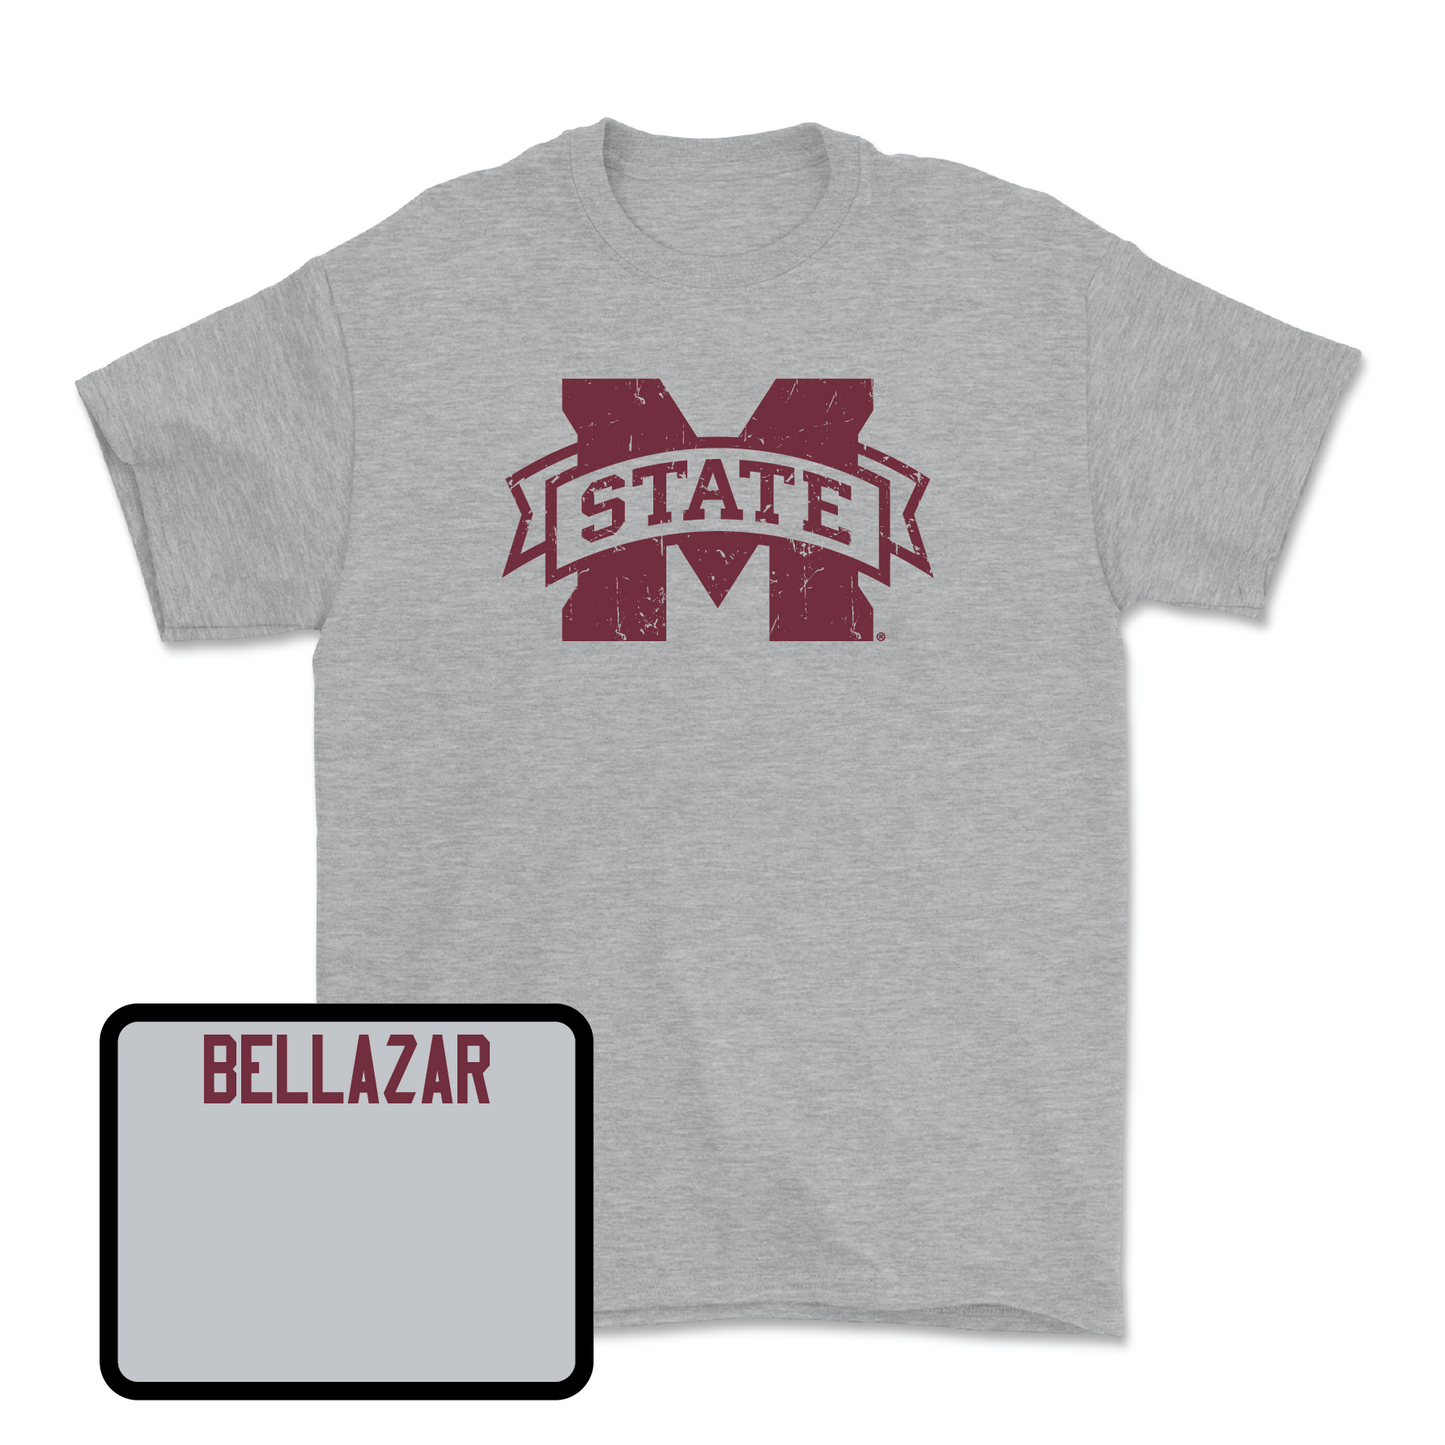 Sport Grey Football Classic Tee 3X-Large / Jacoby Bellazar | #